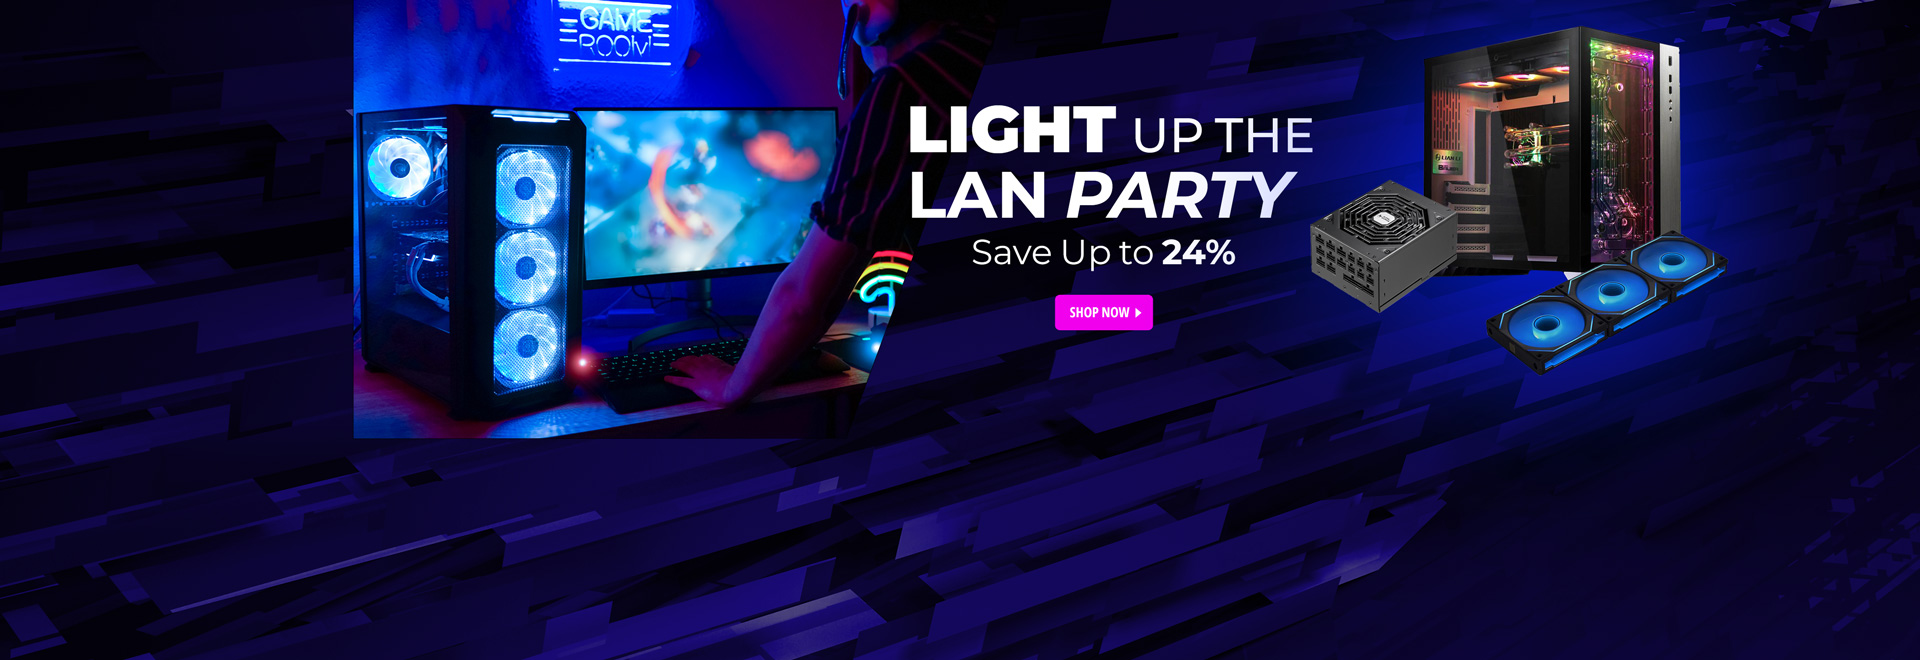 Light up the lan party